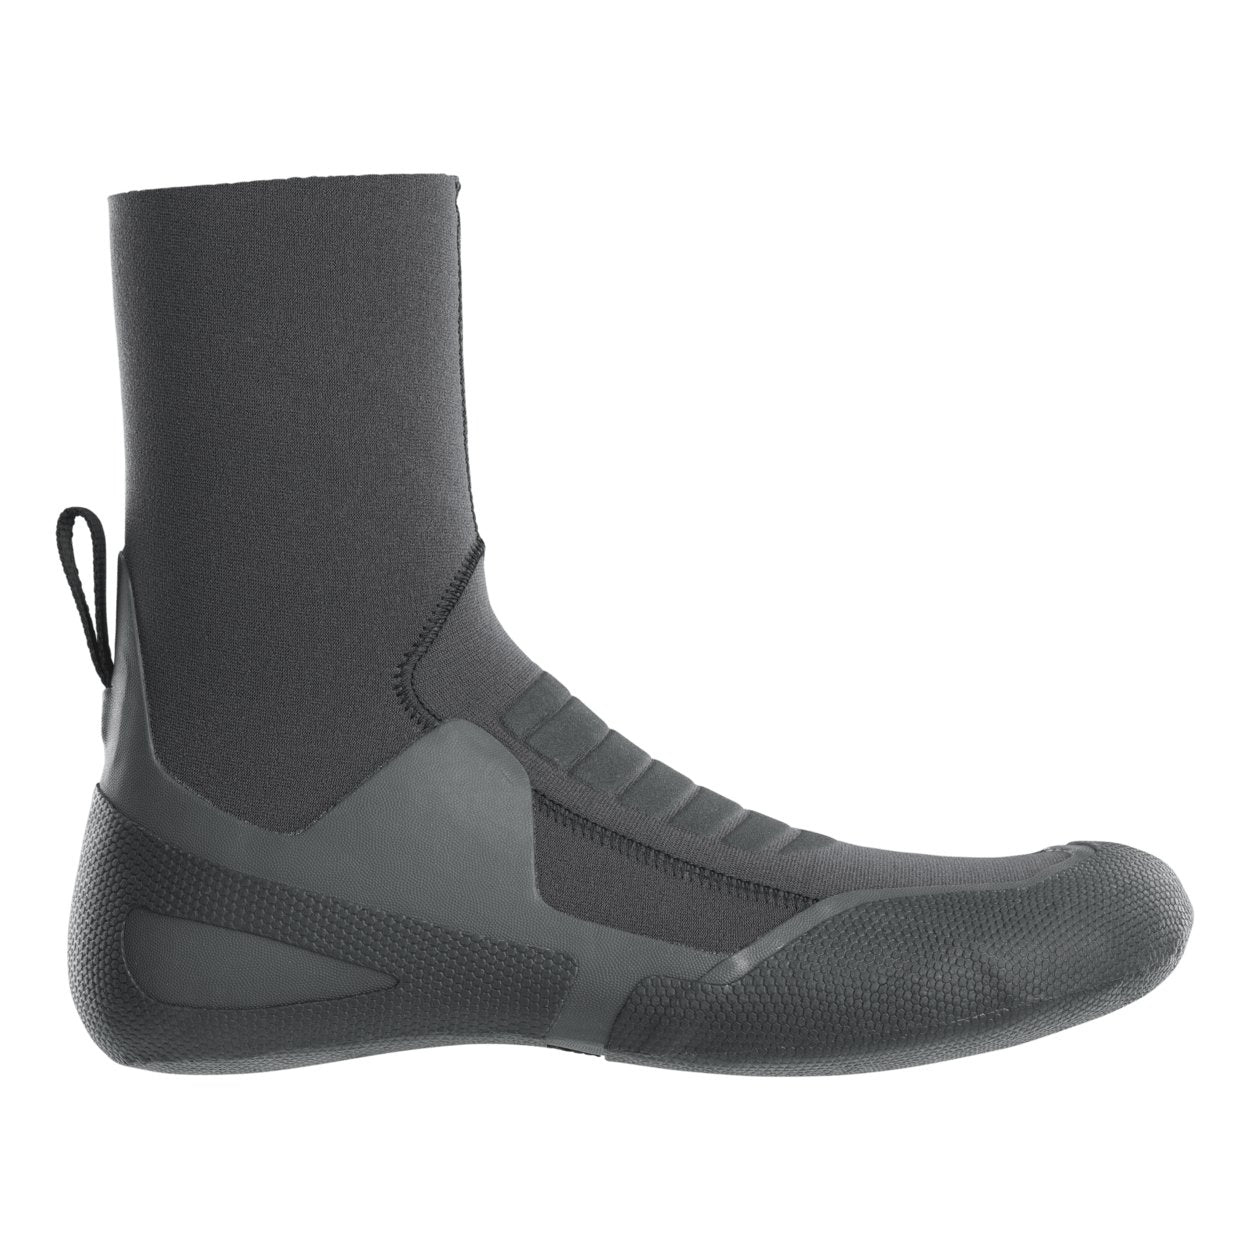 ION Plasma Boots 6/5 Round Toe 2023 - Worthing Watersports - 9010583093024 - Footwear - ION Water